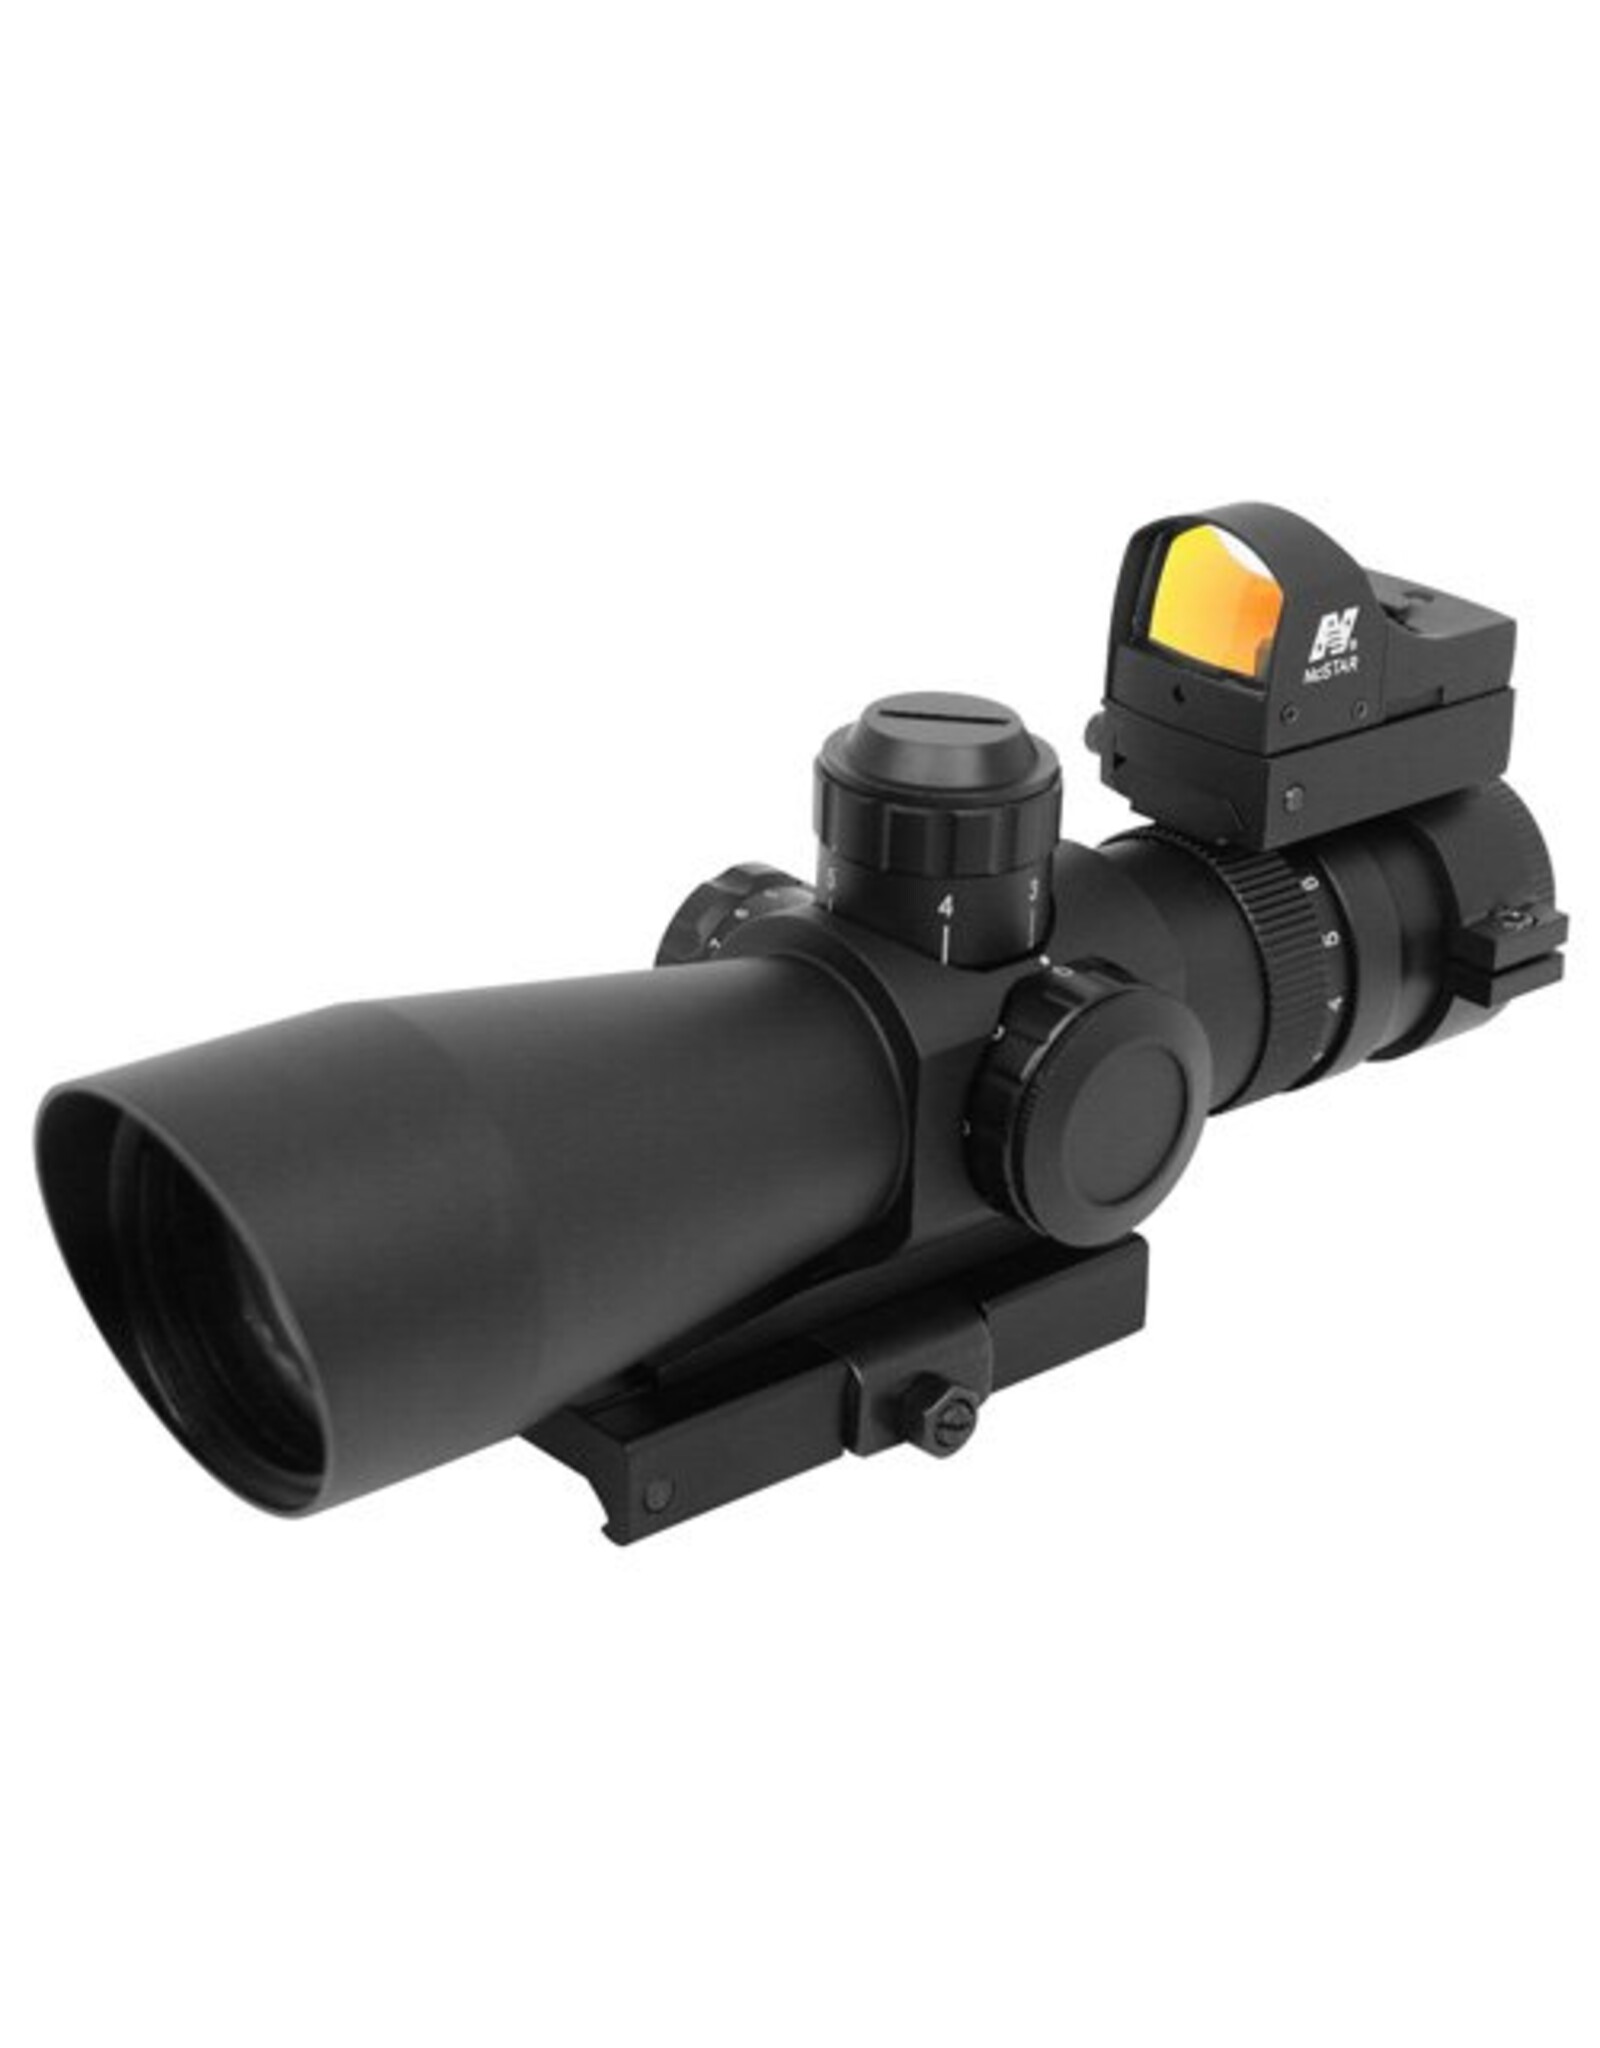 NcStar Mark III Tactical Ultimate Sighting System (3-9X42)